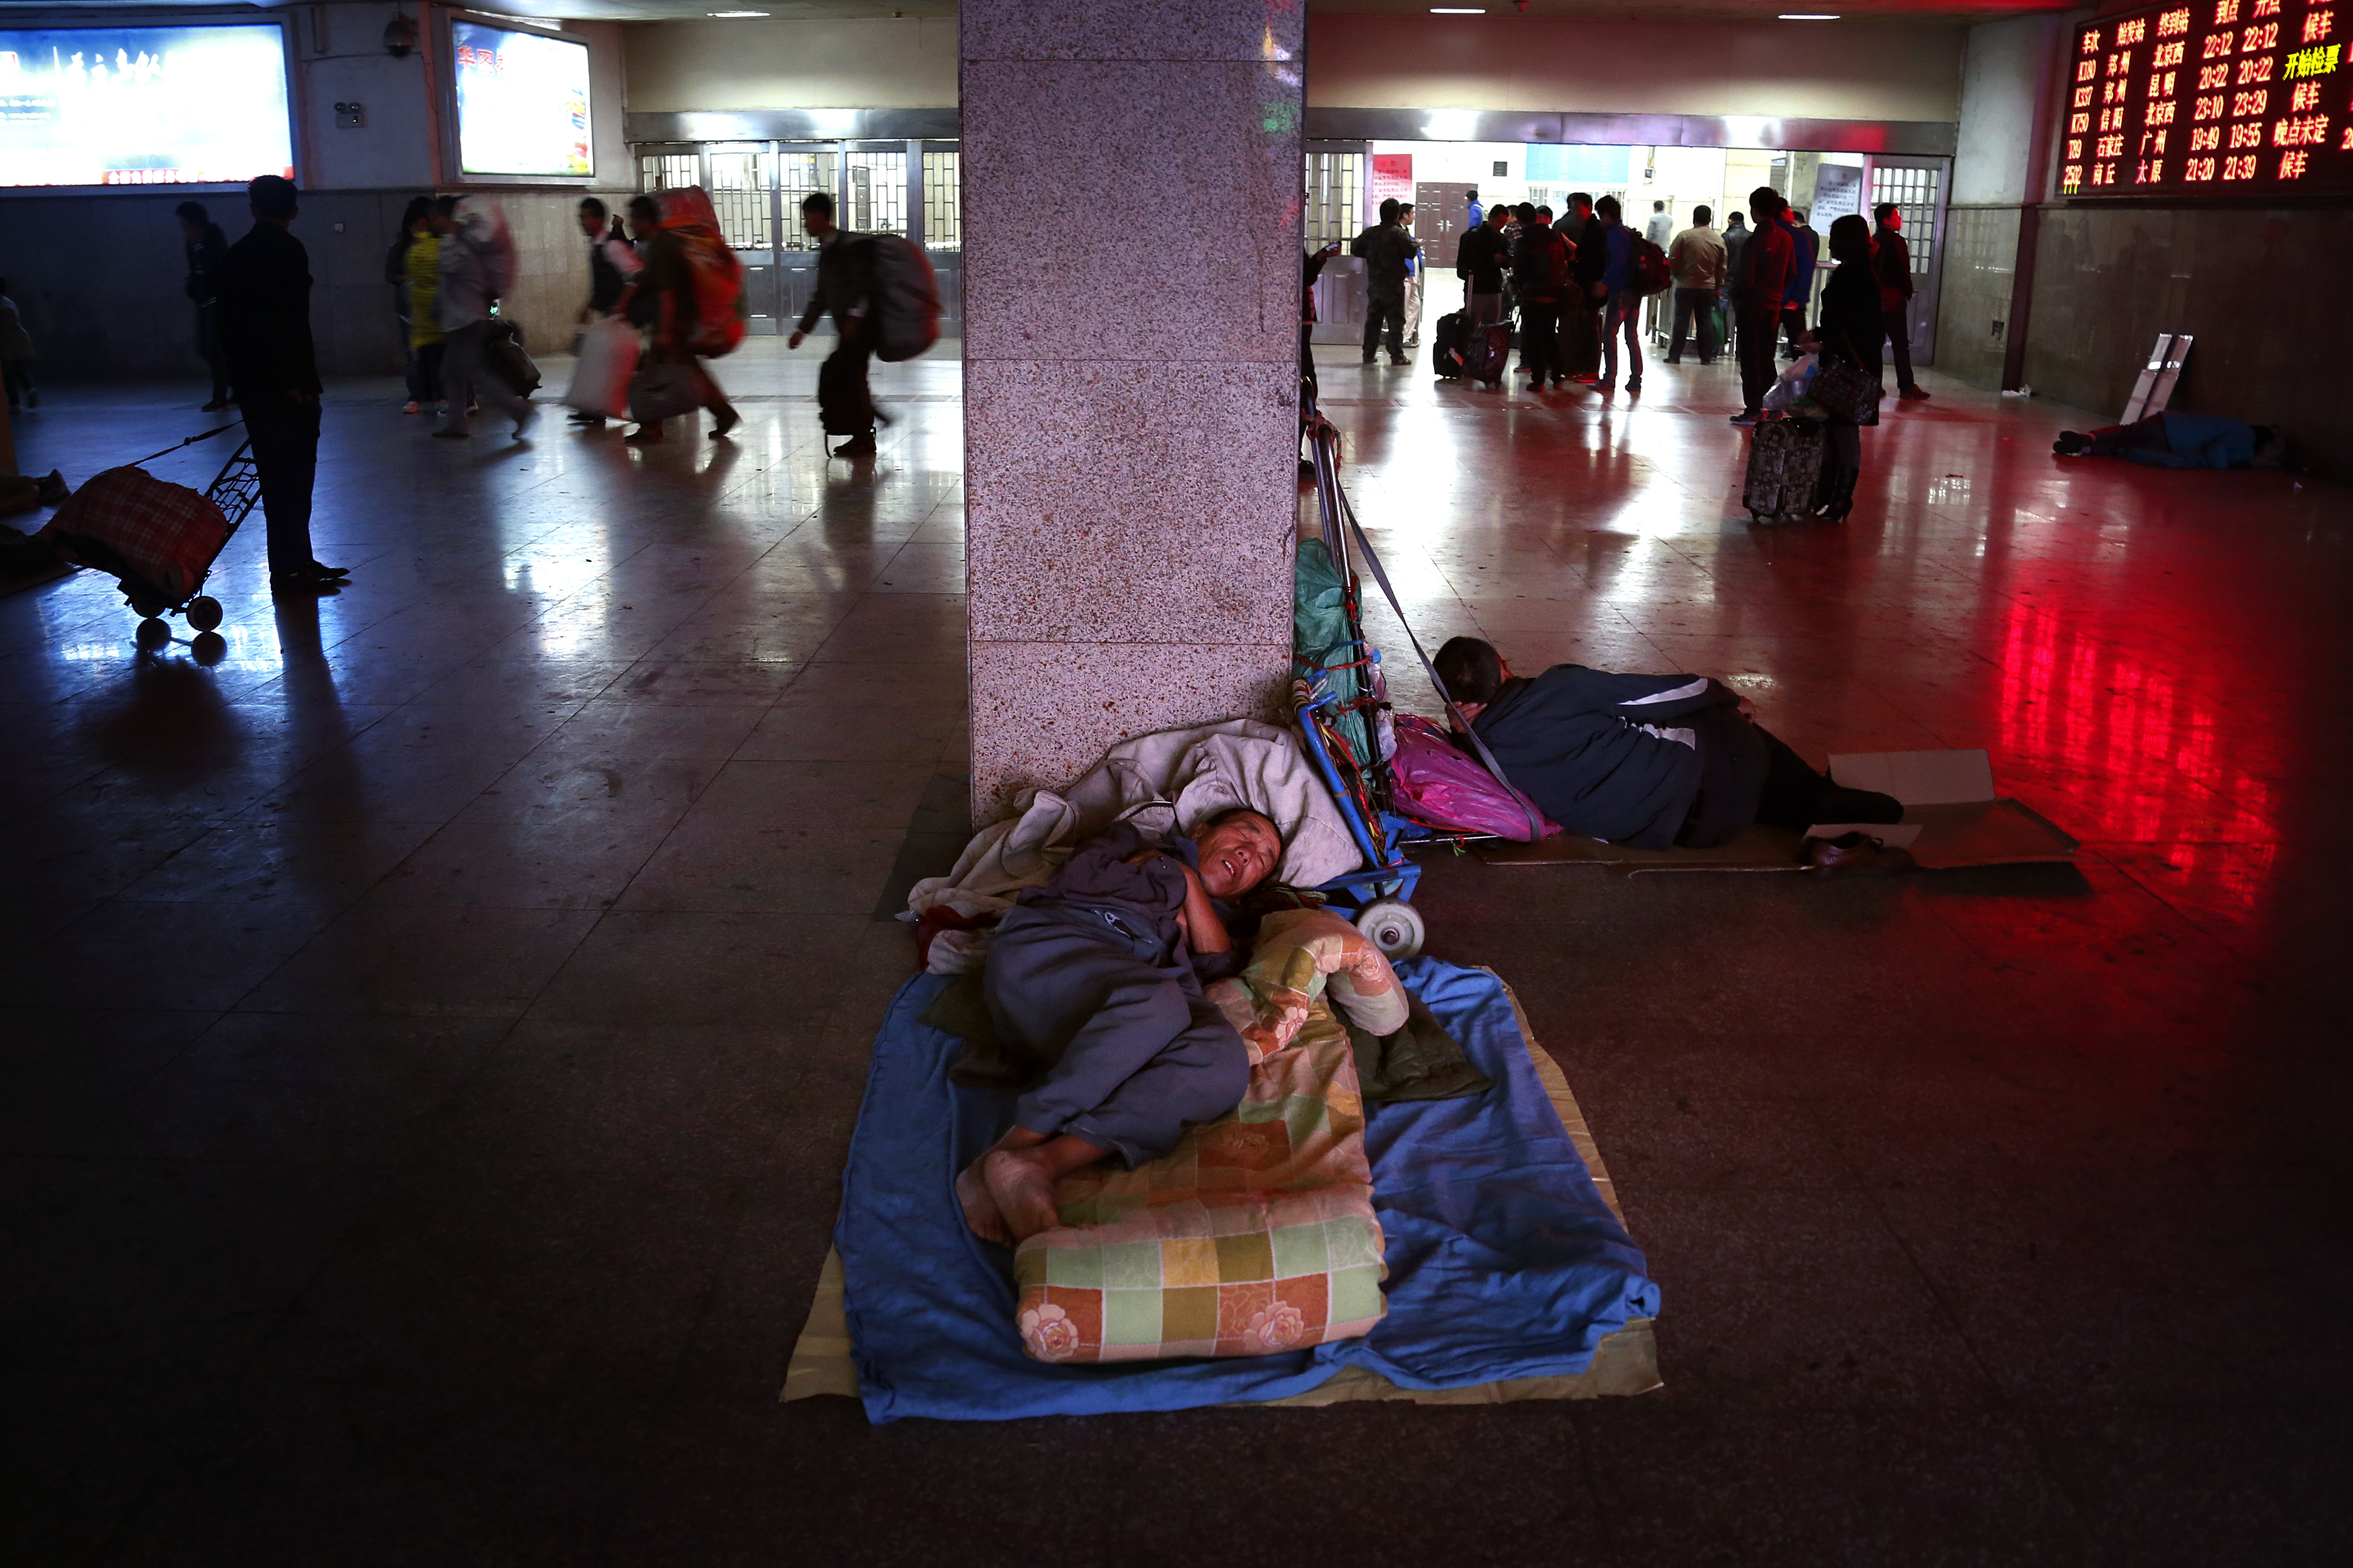 Homeless men sleep at a train station in Zhengzhou in 2012. Sun Zhigang was detained under China’s custody and repatriation system, which largely targeted migrants and homeless people